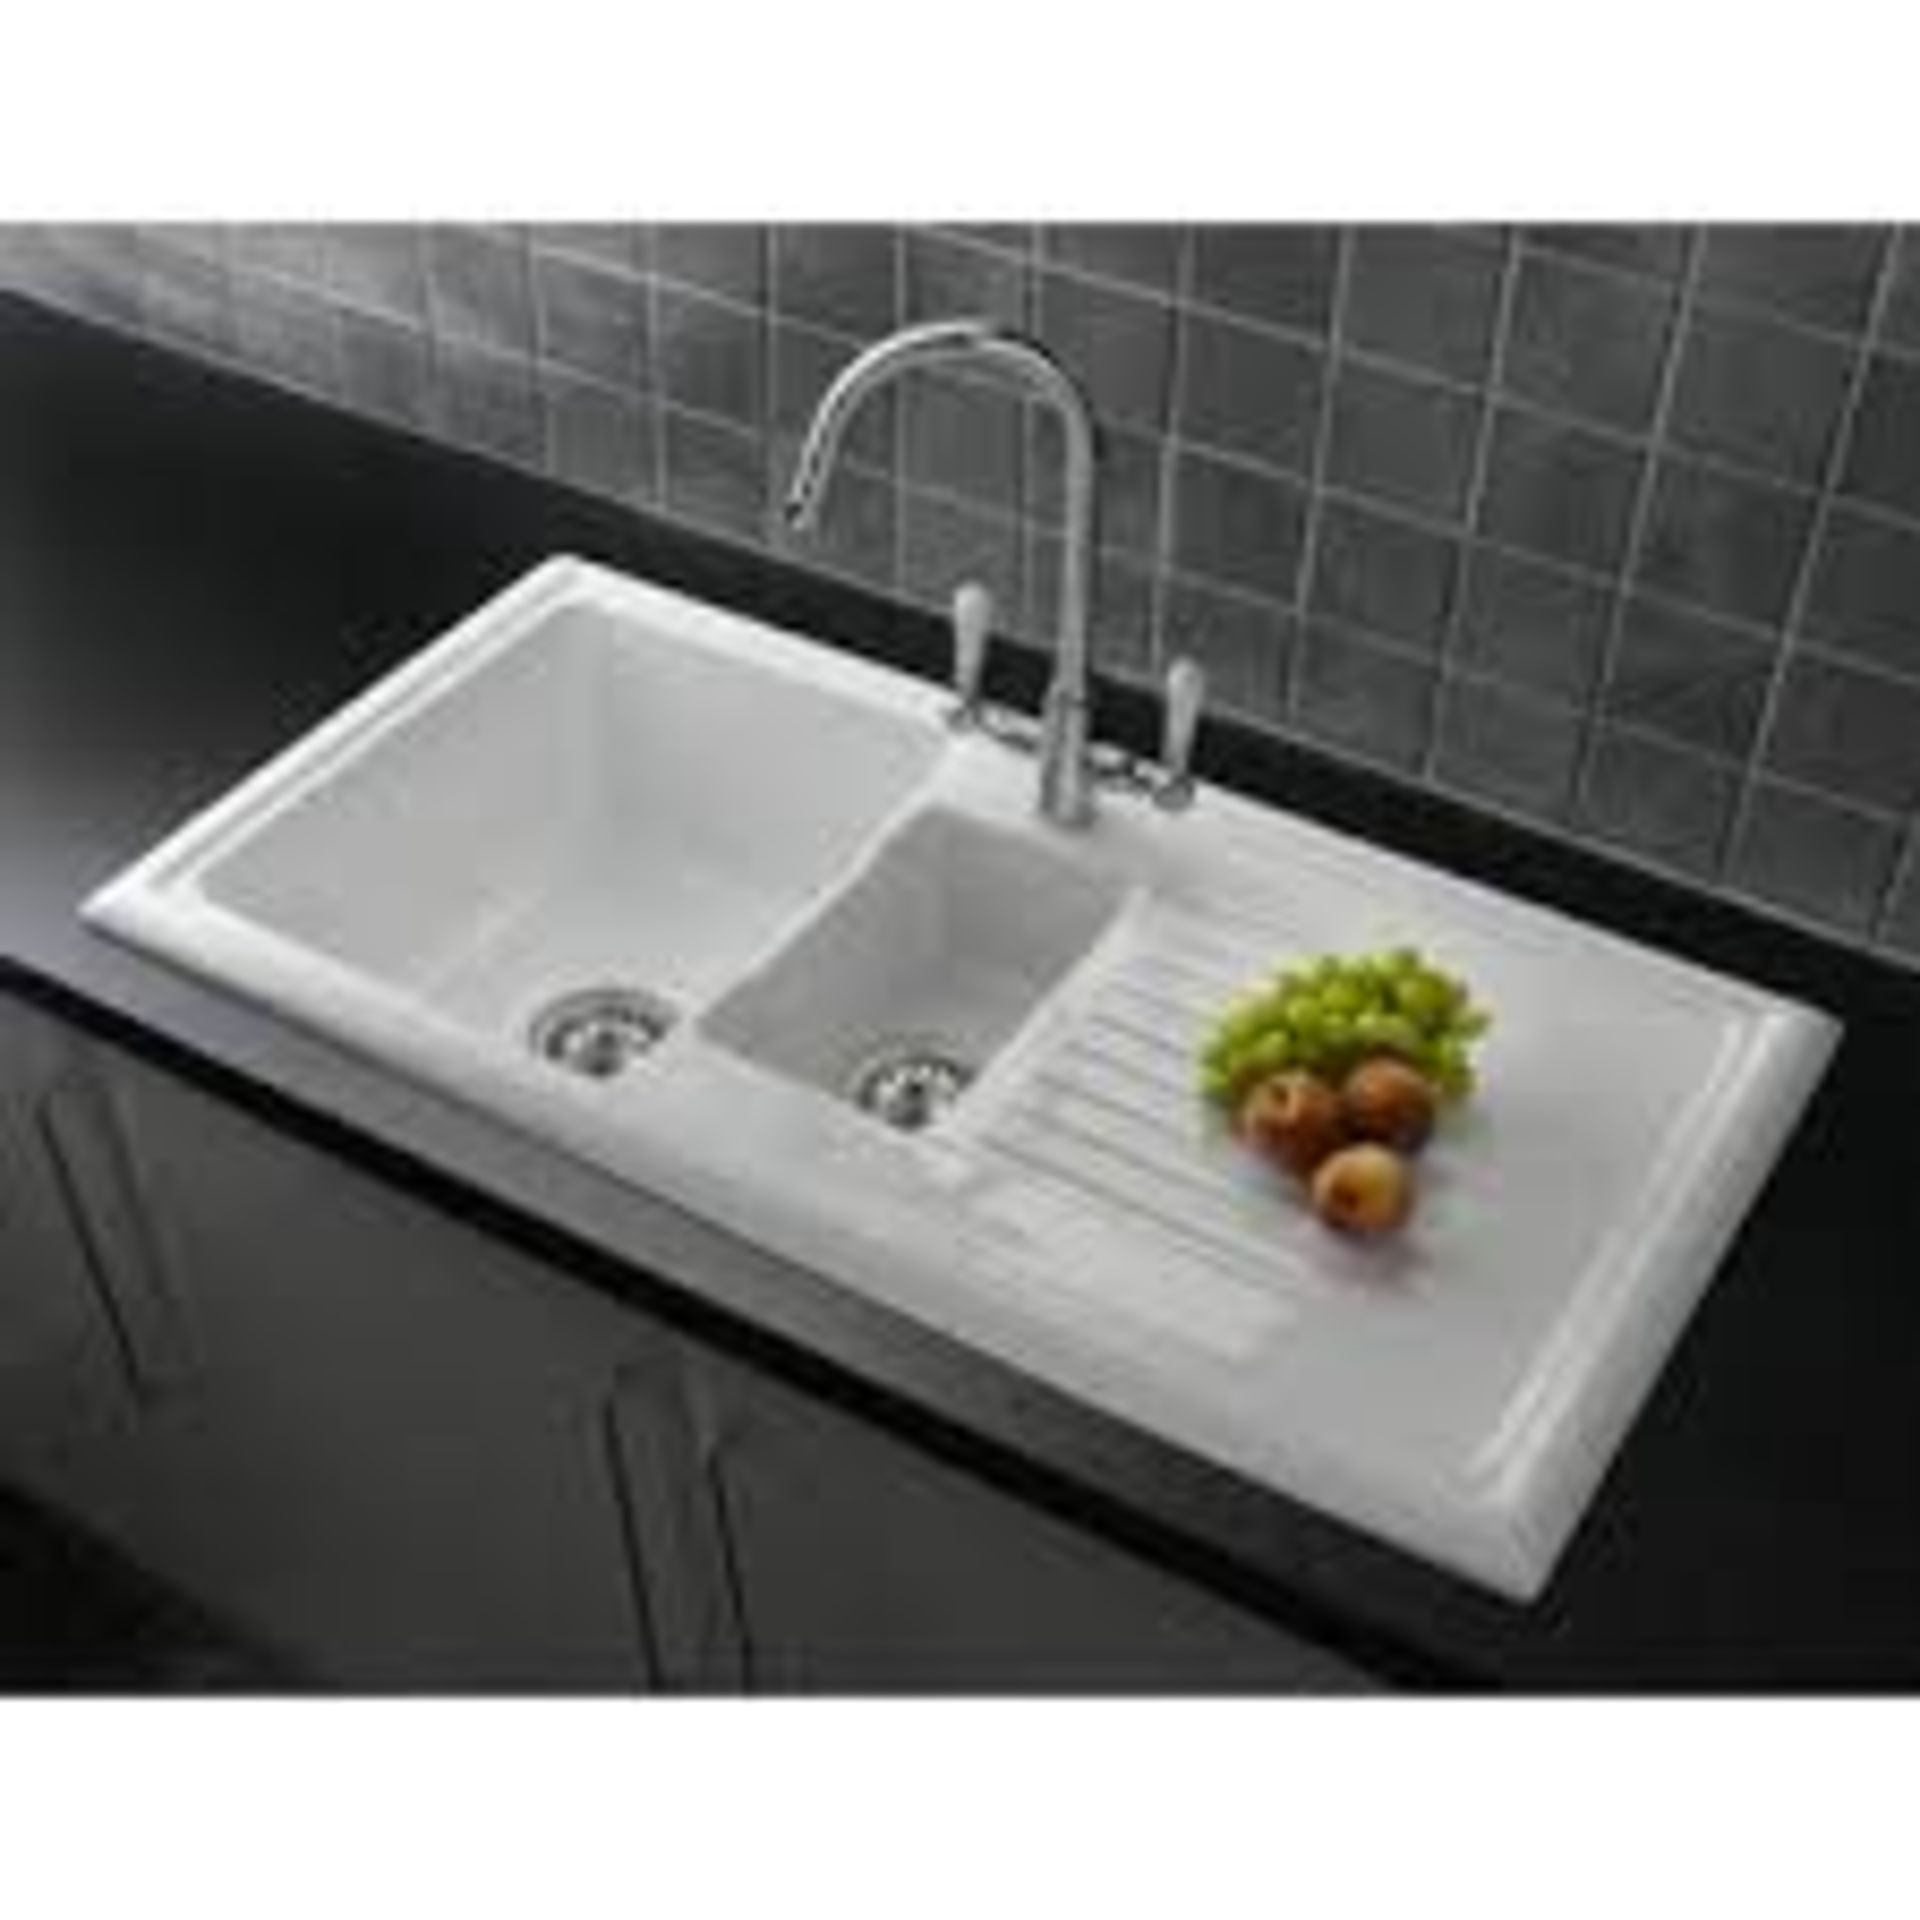 Boxed Reginox Ryne 1.5 Bowl Inset Sink Unit RRP £170 (19374) (APPRAISALS AVAILABLE UPON REQUEST) (